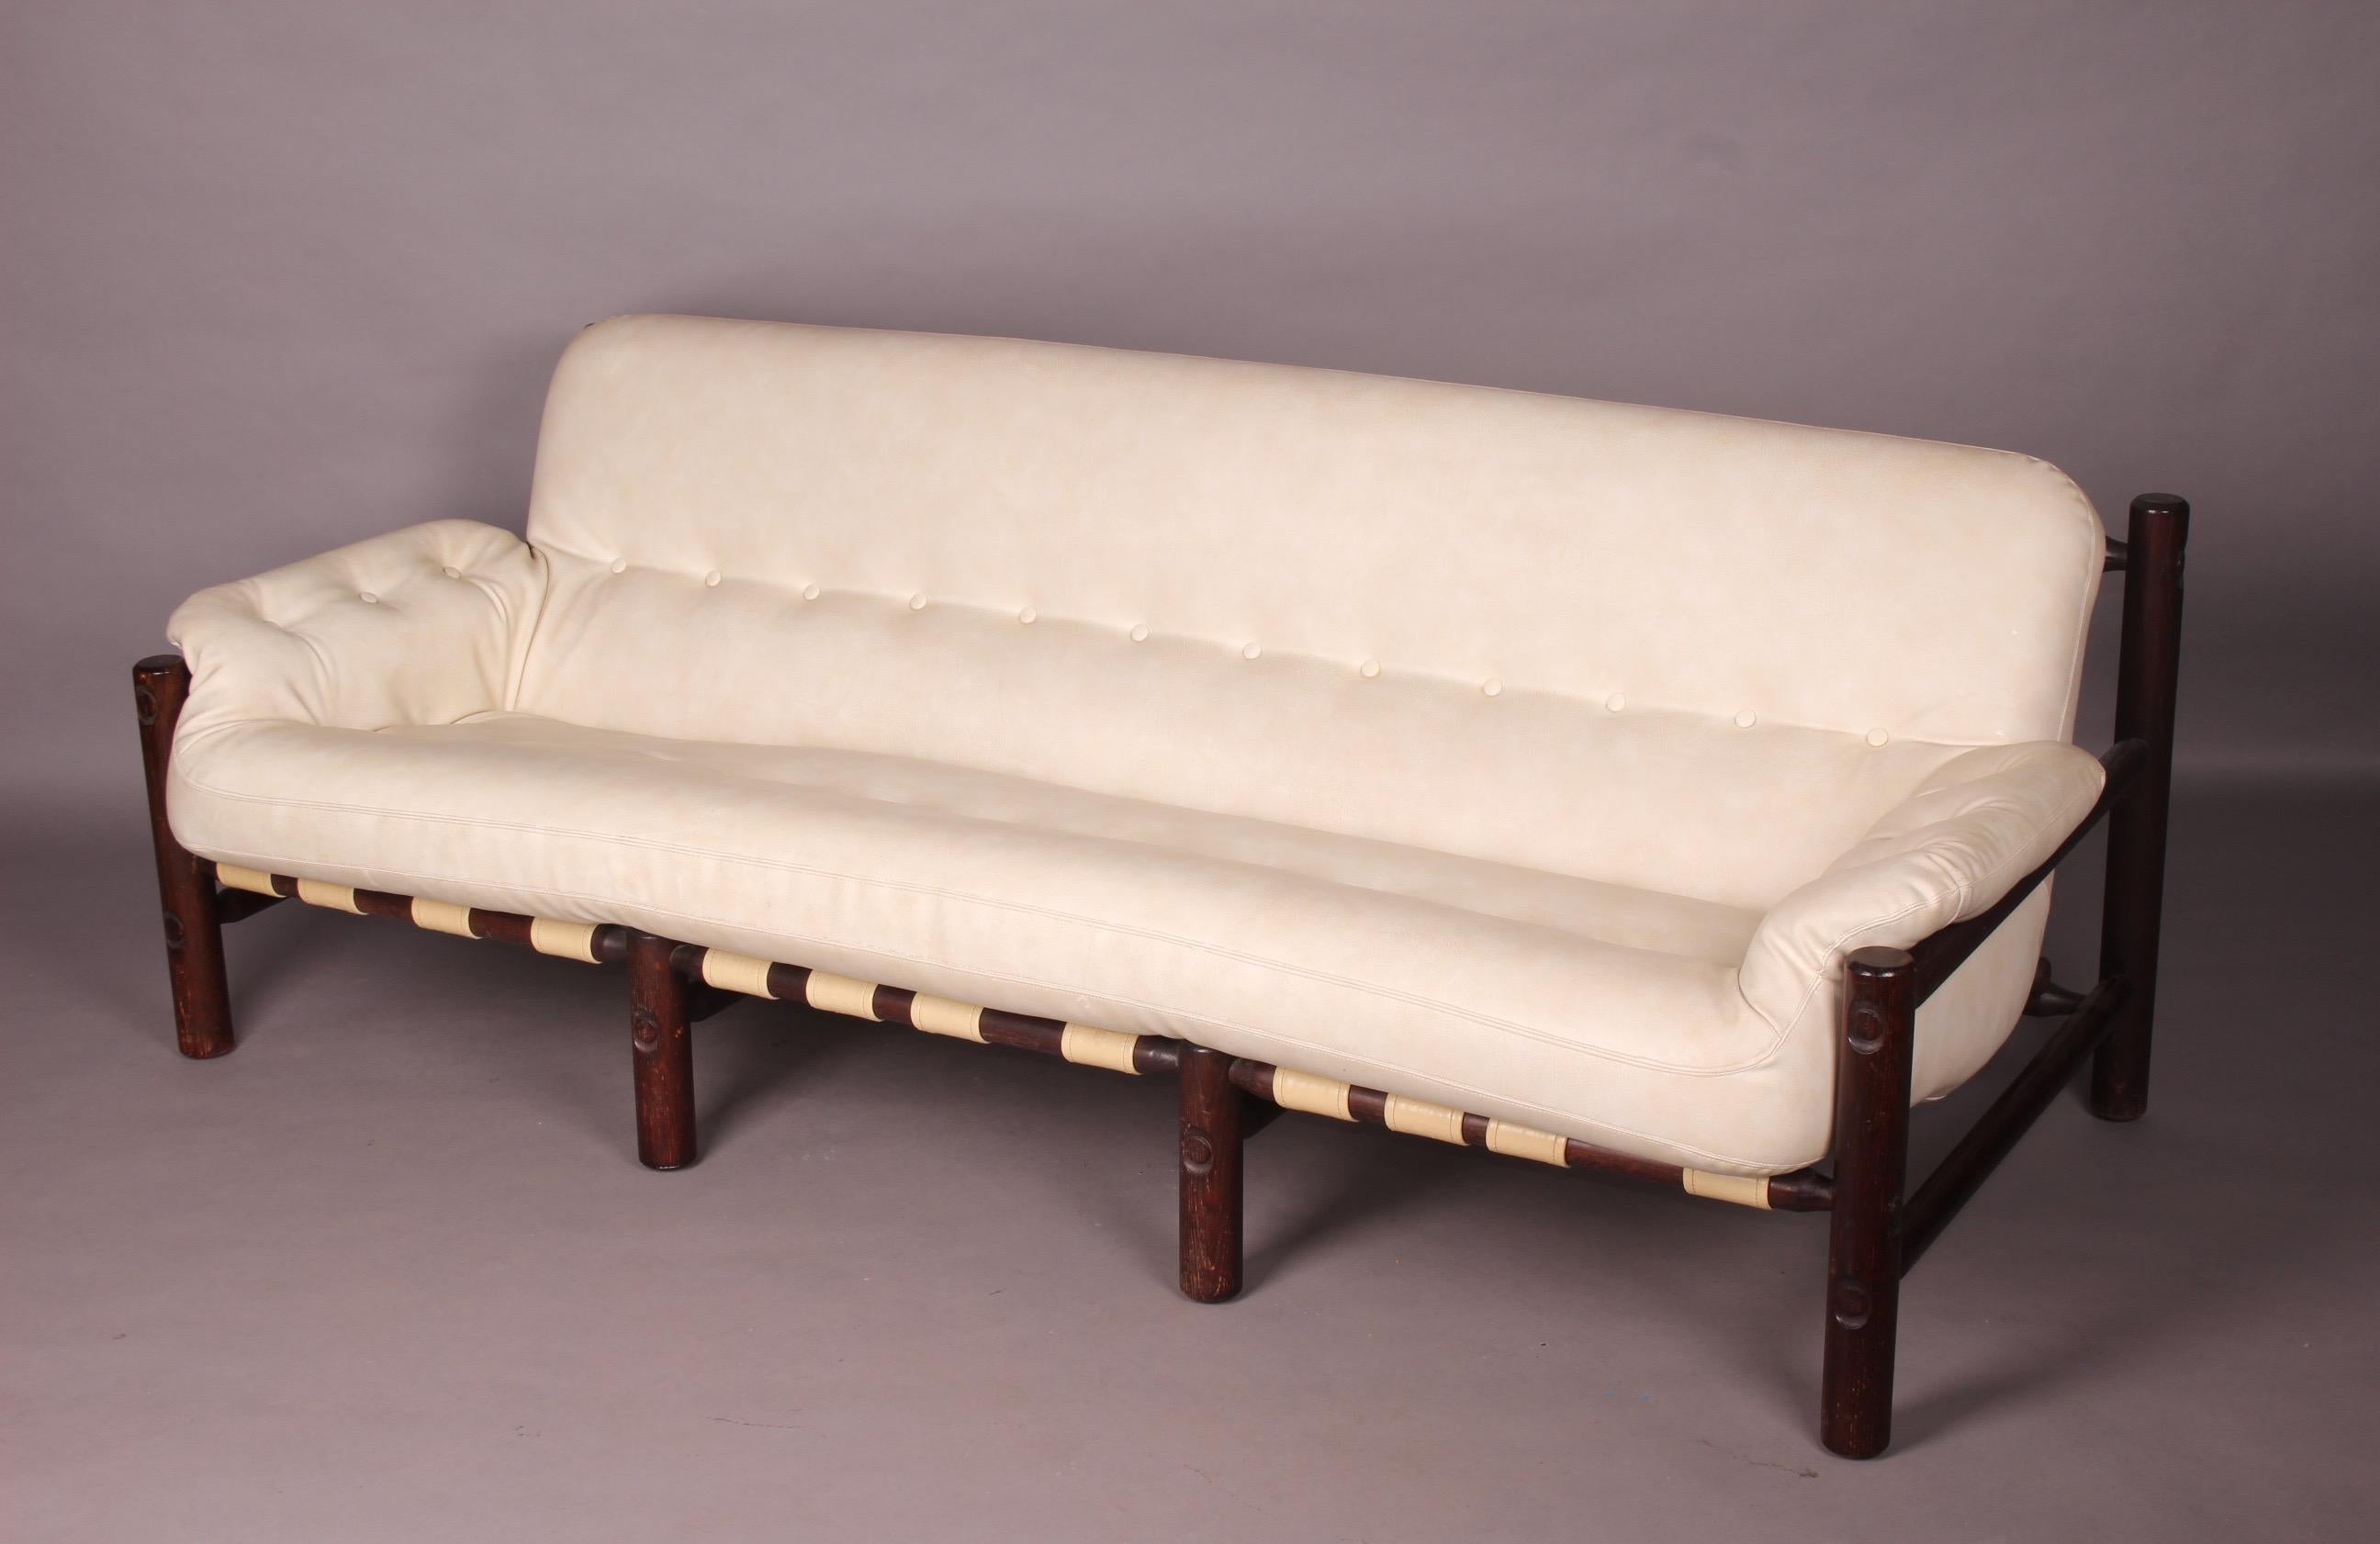 Wood and faux leather sofa , the skai must be cleaned and two missing buttons are missing as can be seen in the photo.